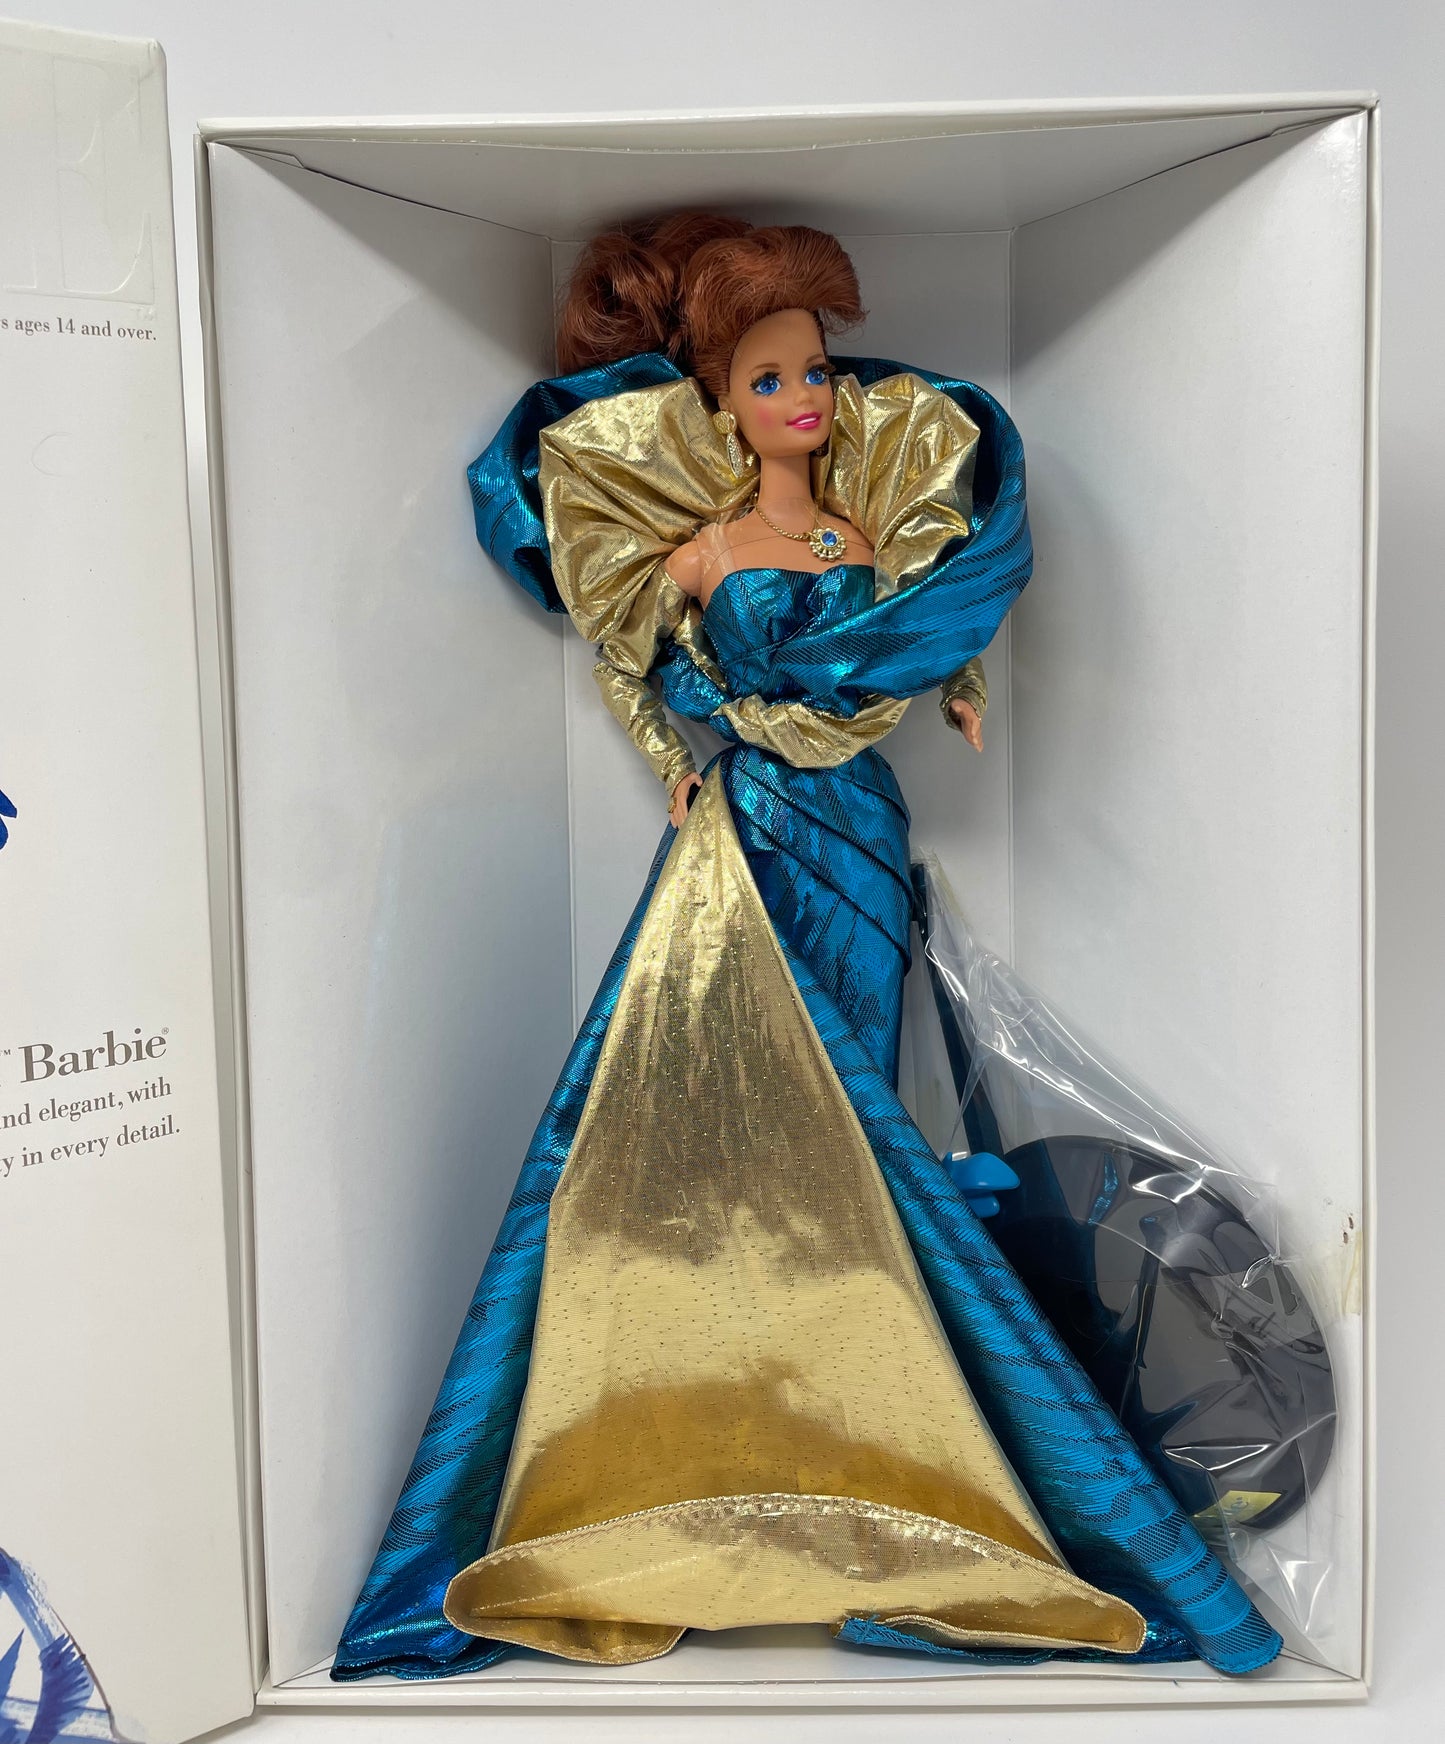 BENEFIT BALL BARBIE  - BLONDE - BY CAROL SPENCER - CLASSIQUE COLLECTION - LIMITED EDITION - #1521 - MATTEL 1994